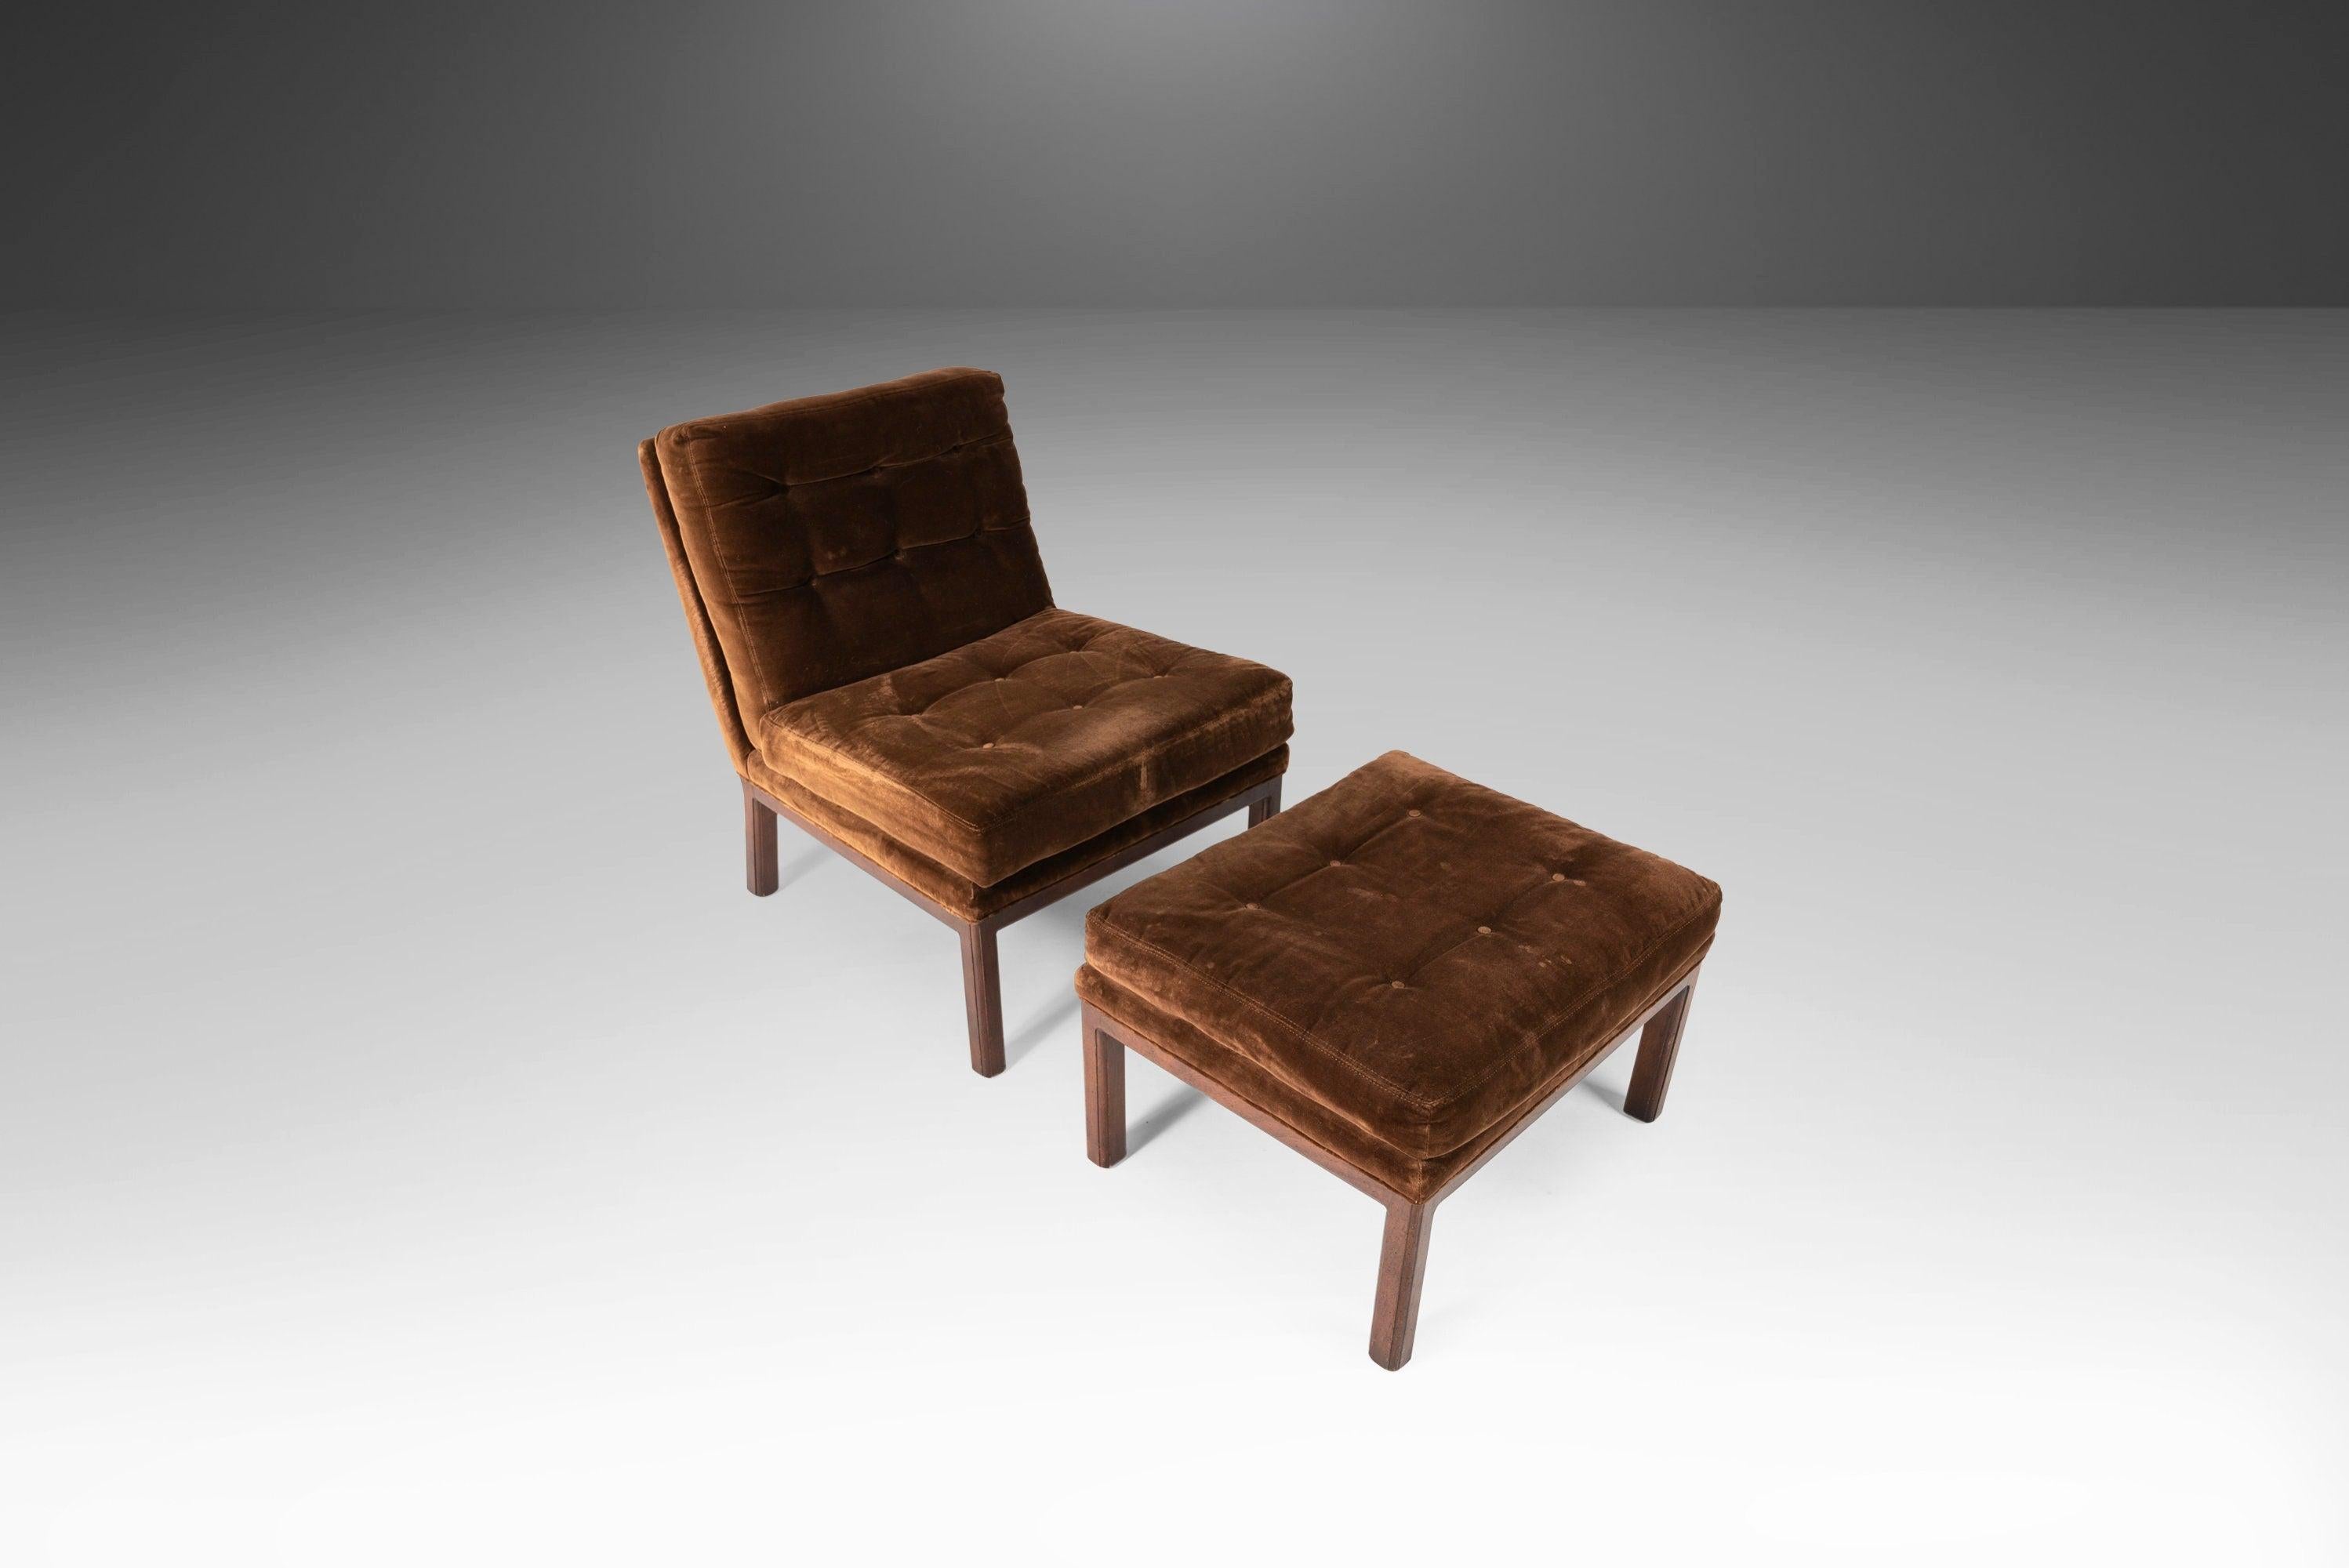 Equal parts style and comfort this exquisite chair and ottoman set, attributed to the iconic Harvey Probber (though uncannily similar to Florence Knoll's armless chair), is ideal for those searching for a seating experience that is comfortable as it